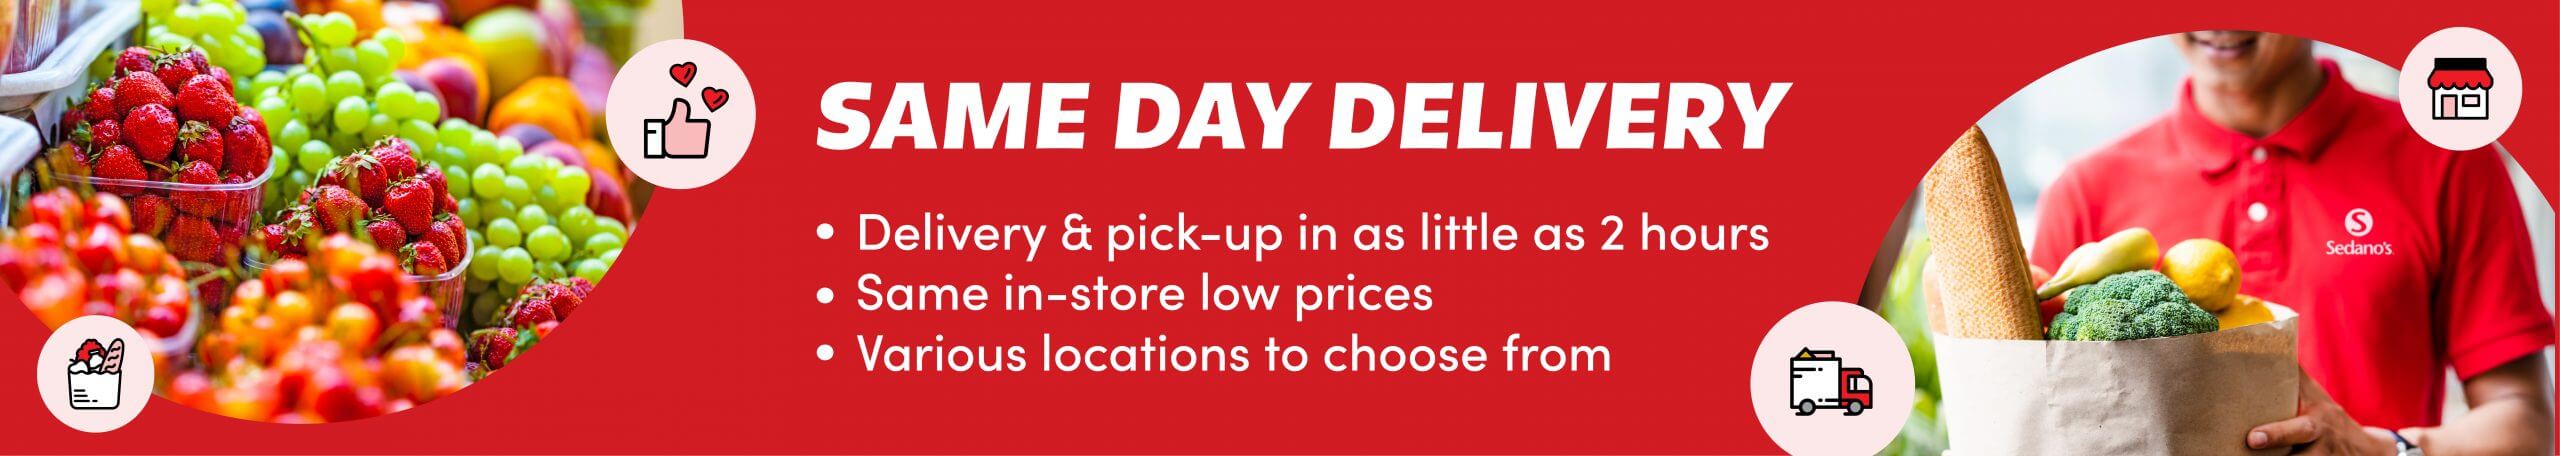 Sedanos.com | Free Pick Up and Same Day Grocery Delivery | Catering